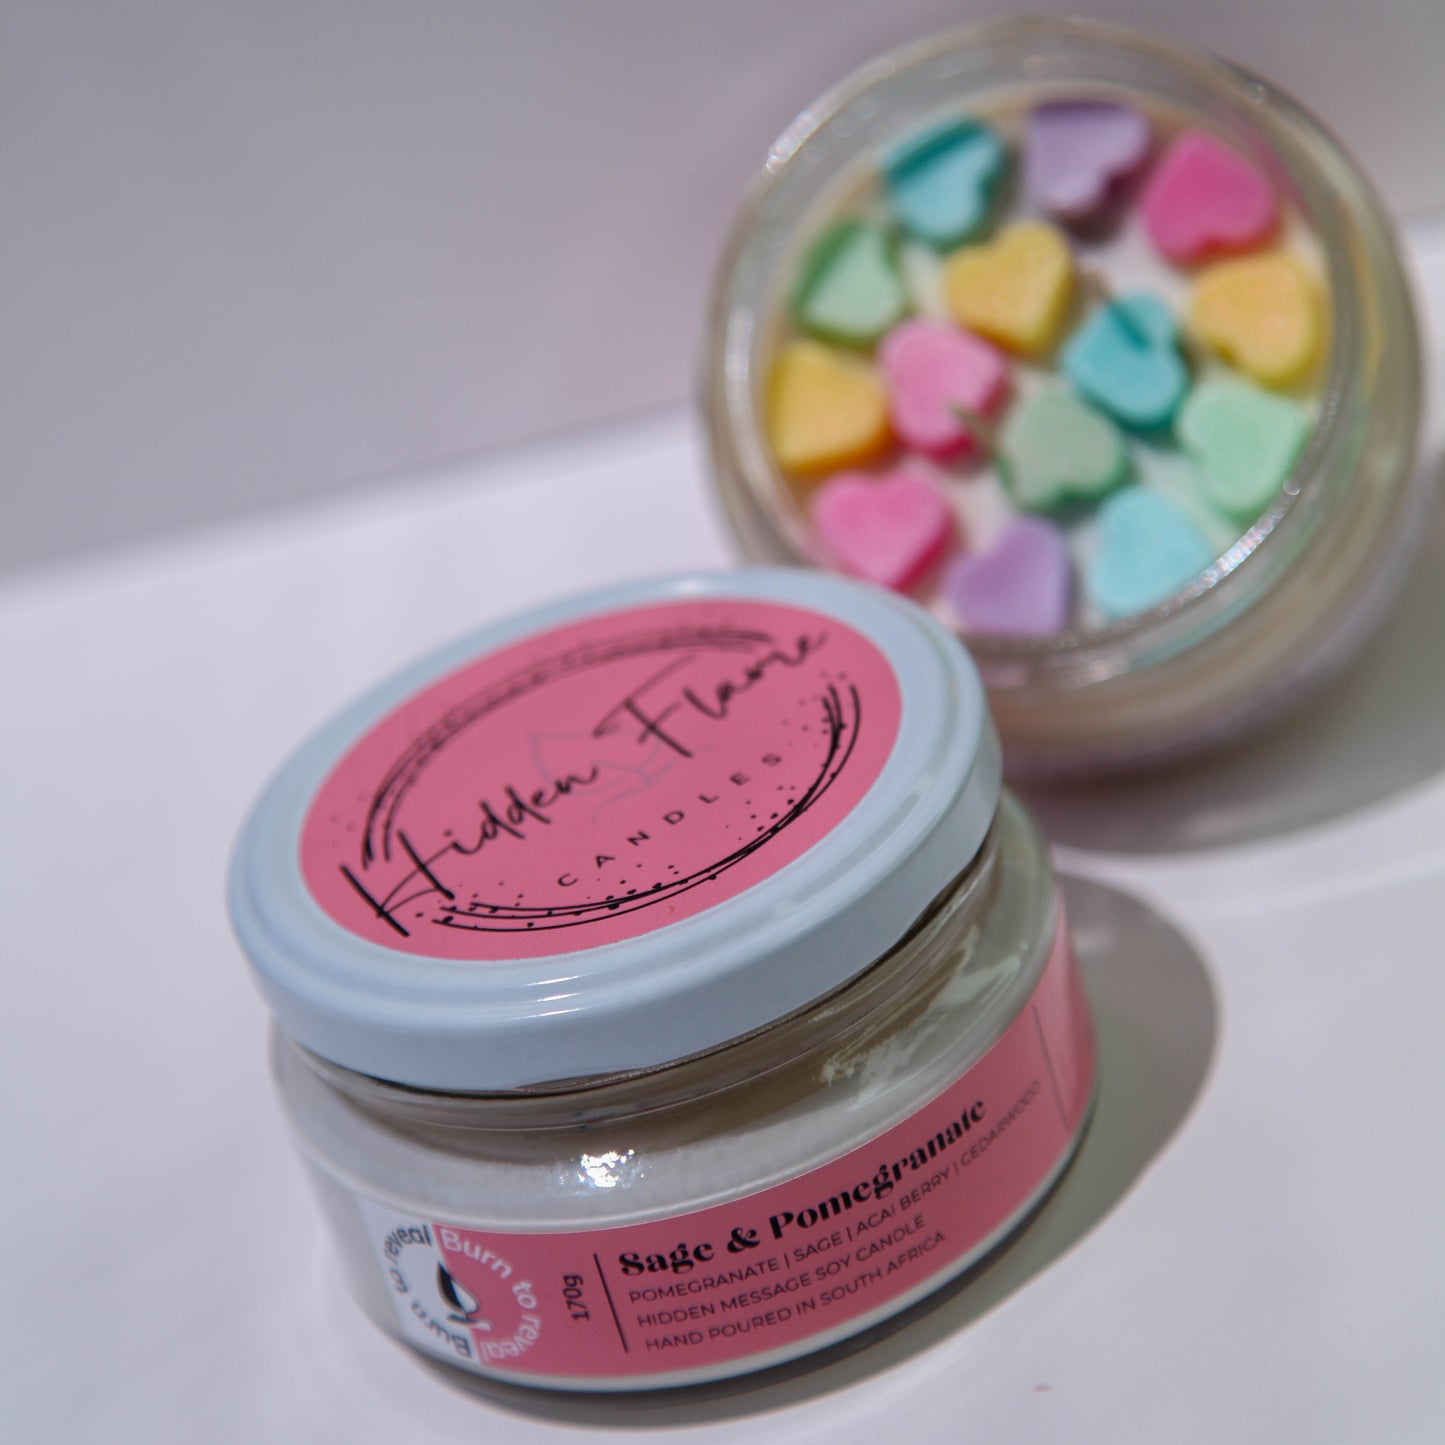 "Teach and Empower" Love Heart Candle